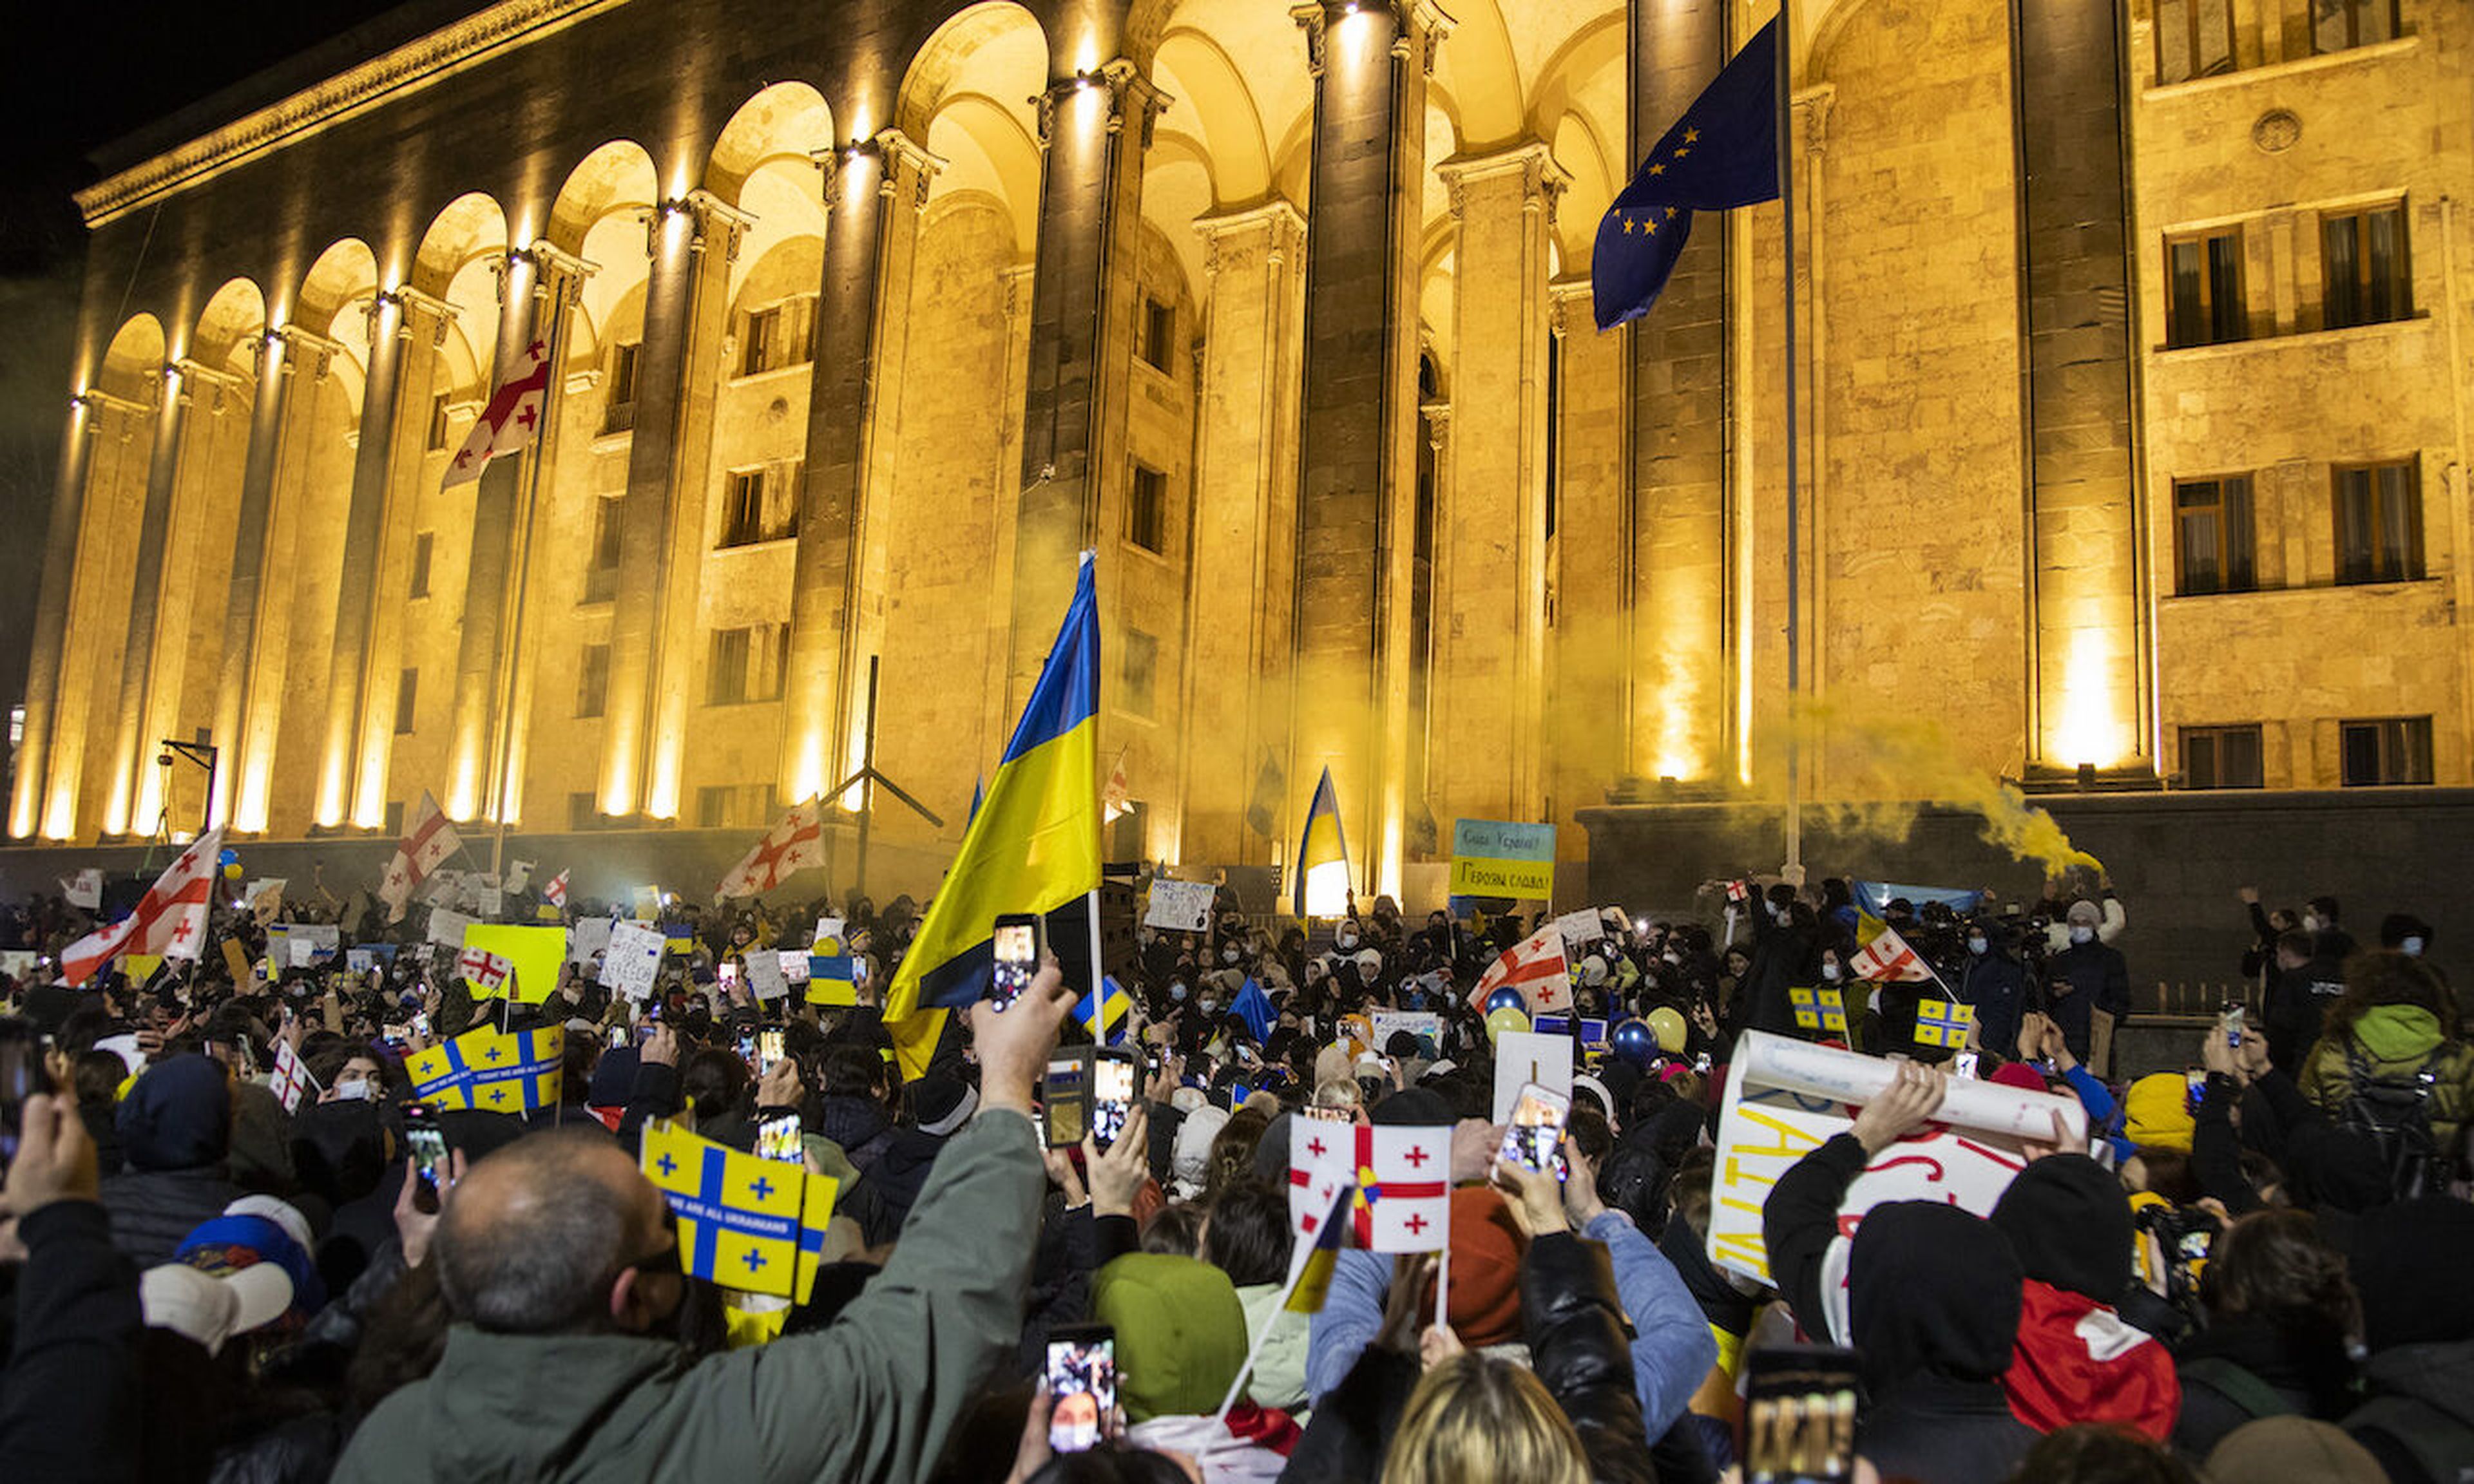 Georgians rally in support of Ukraine held in front of the Parliament demanding that Russian President Putin ends the war. Ransomware gangs have retaliated against the Russia-based Conti group after threatening attacks to Western countries that target Russia. (Photo by Daro Sulakauri/Getty Images)